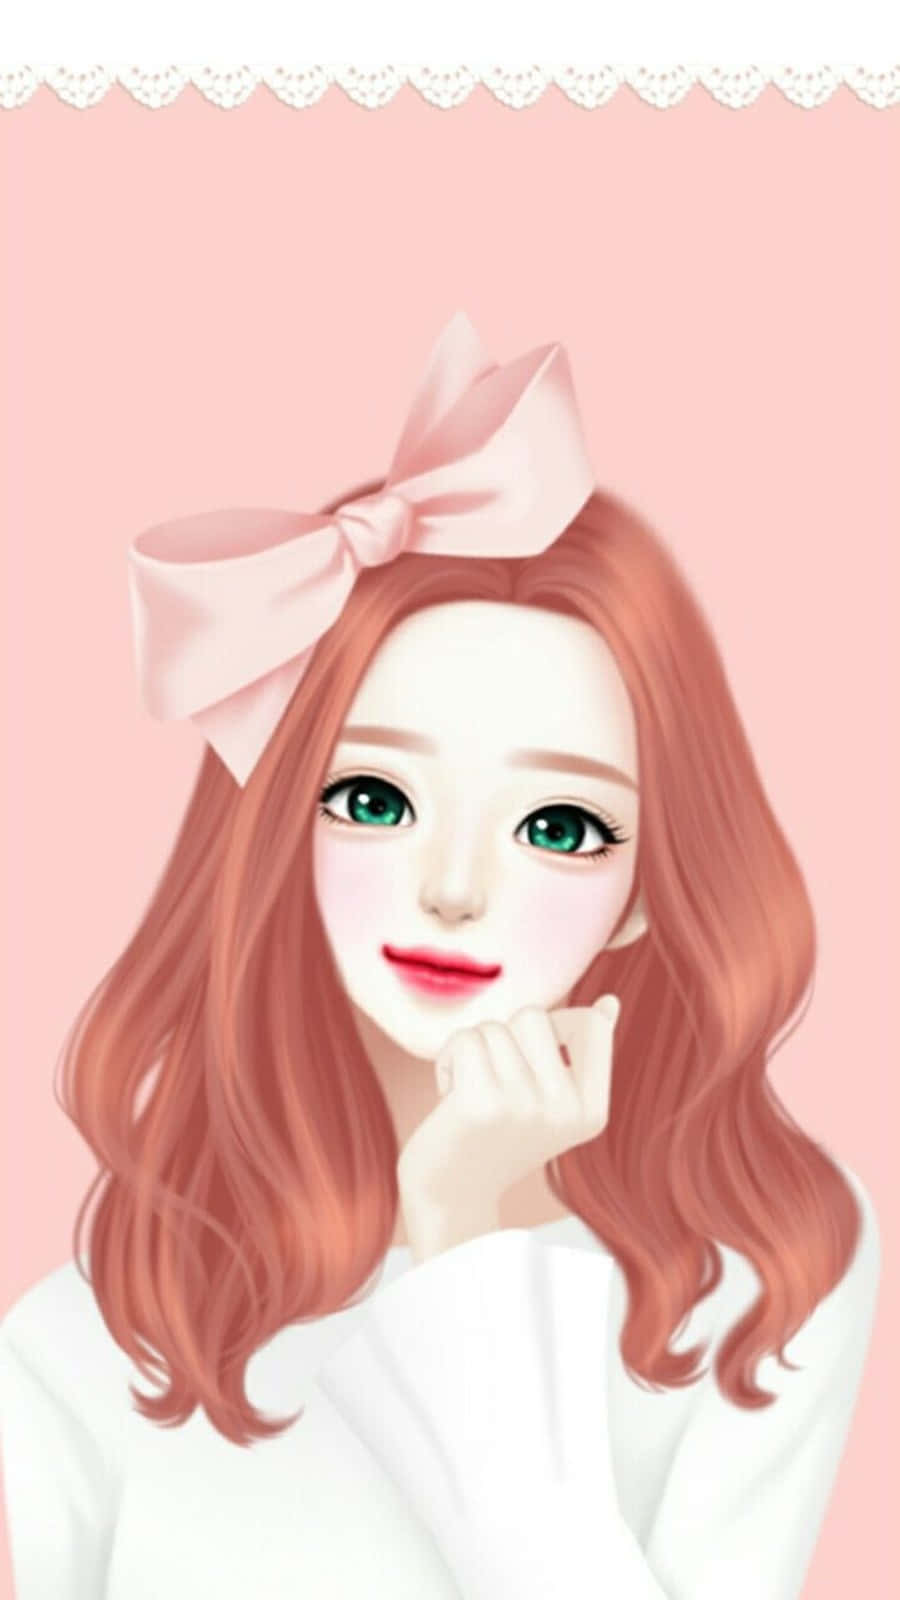 Korean Anime Girl With Pink Bow On Head